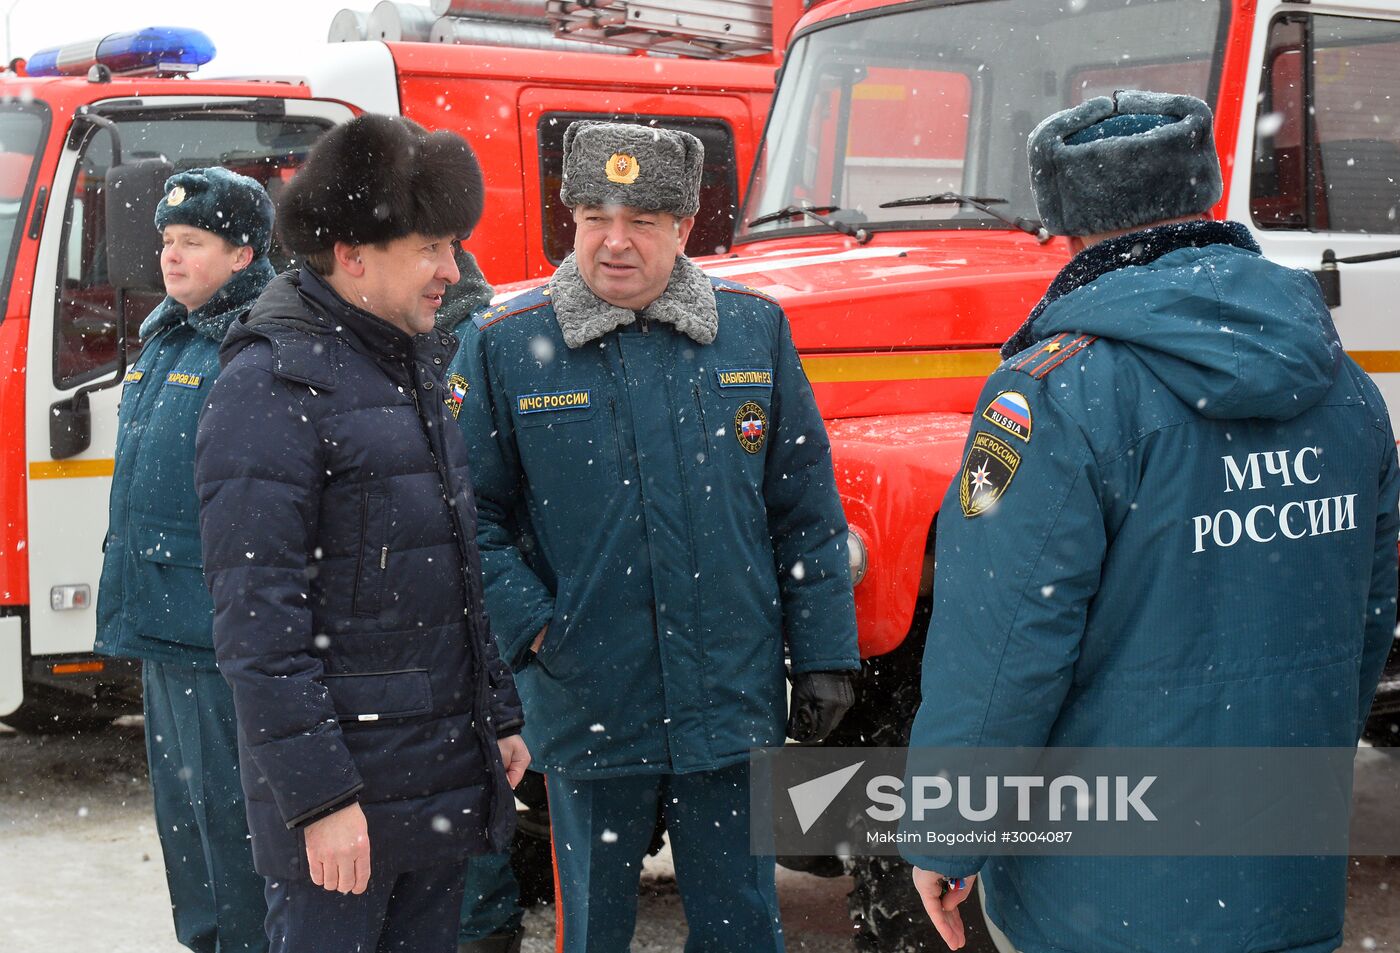 Fire and rescue units in Kazan get new equipment